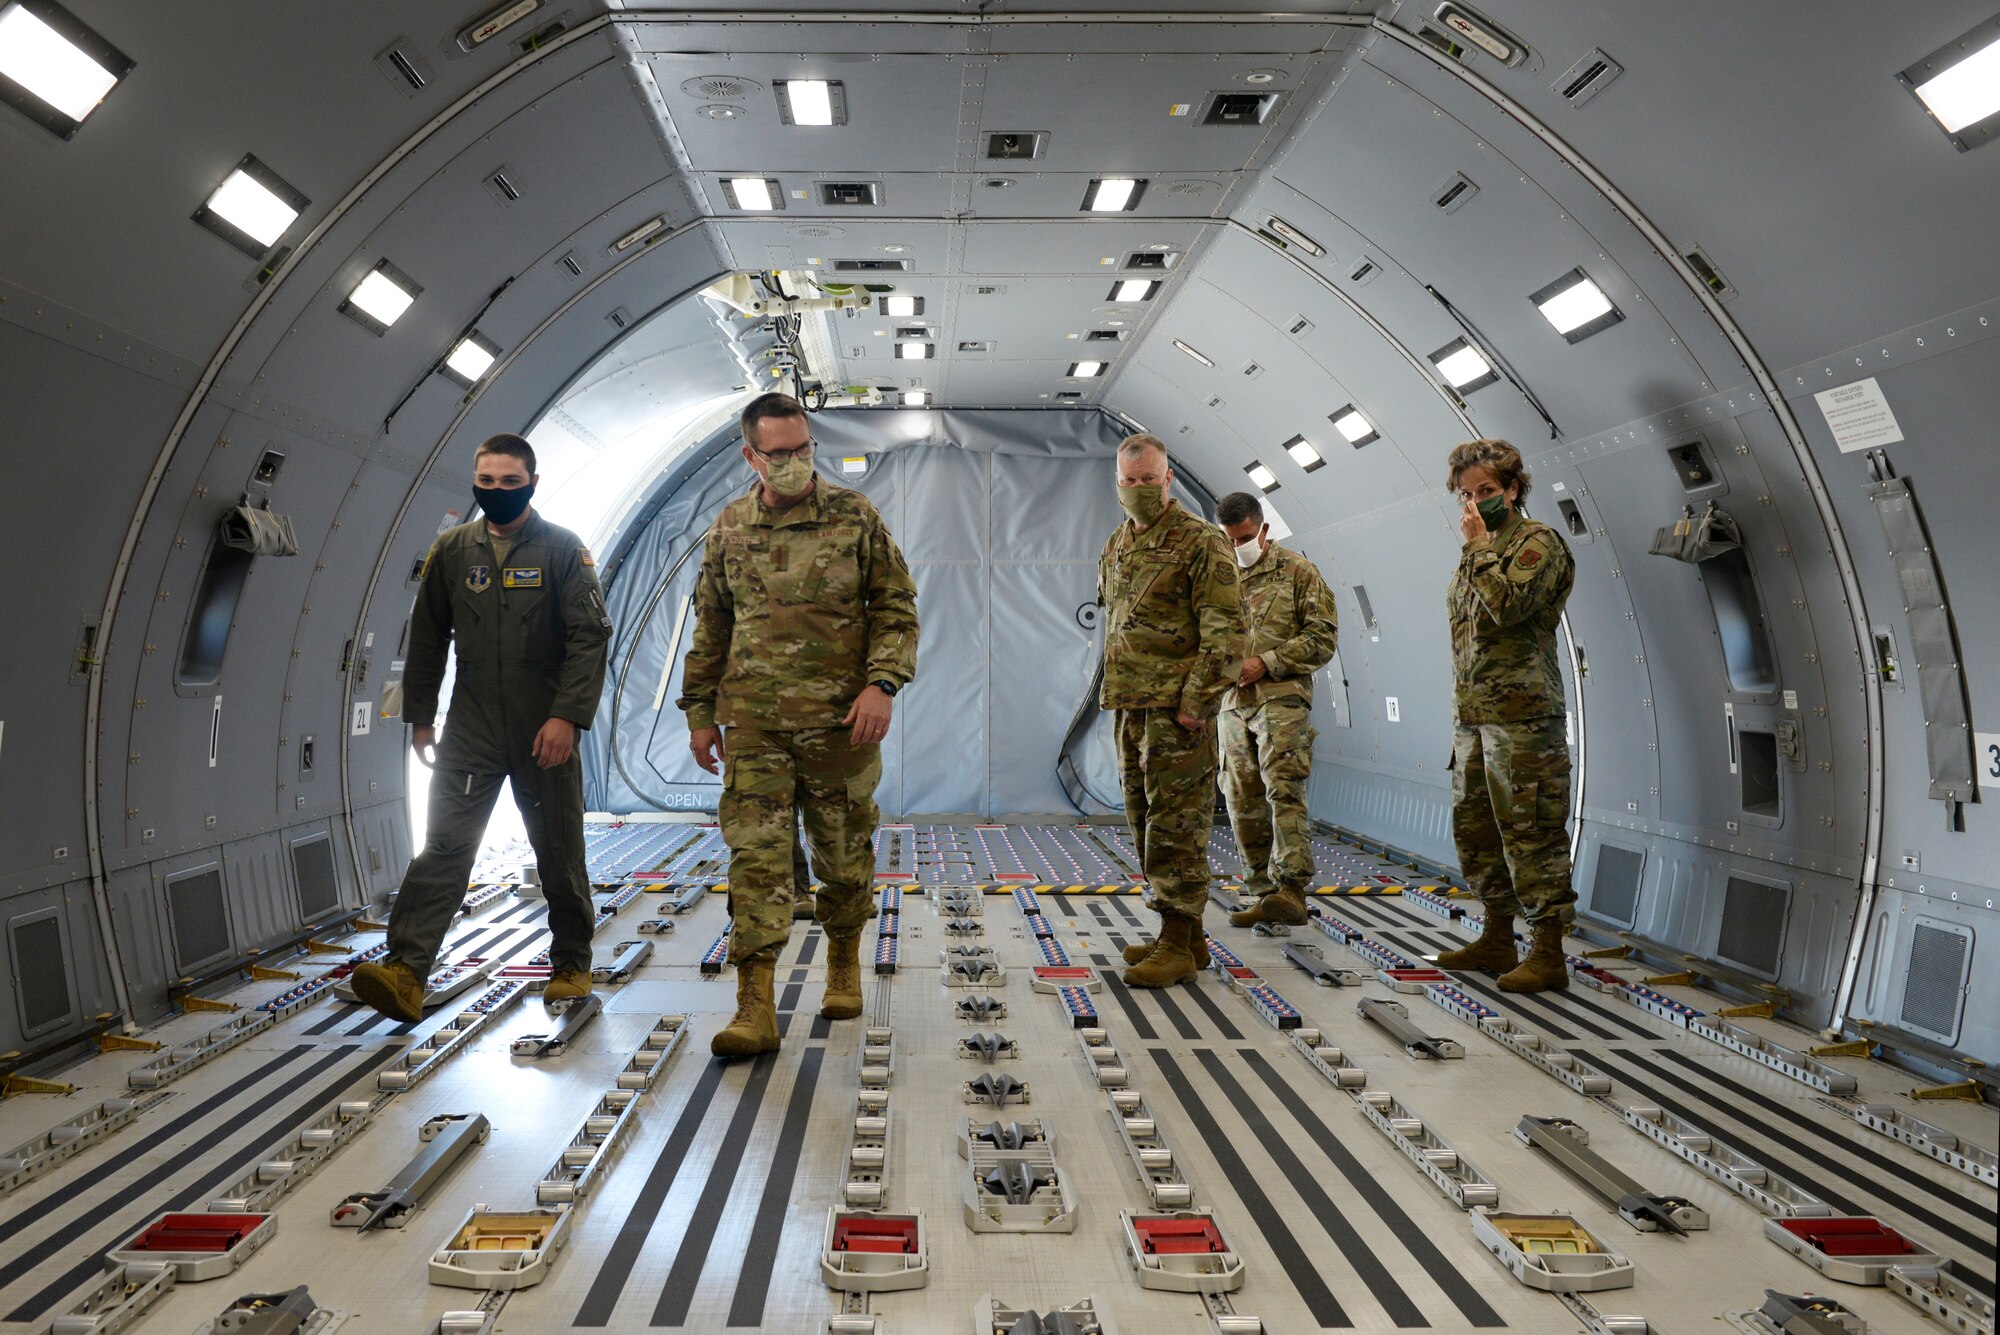 Gen. Joseph L. Lengyel, the Chief of the National Guard Bureau, tours the KC-46A Pegasus during his visit to Pease Air National Guard Base, Newington, N.H., May 27, 2020. (U.S. Air National Guard photo by Senior Master Sgt. Timm Huffman)